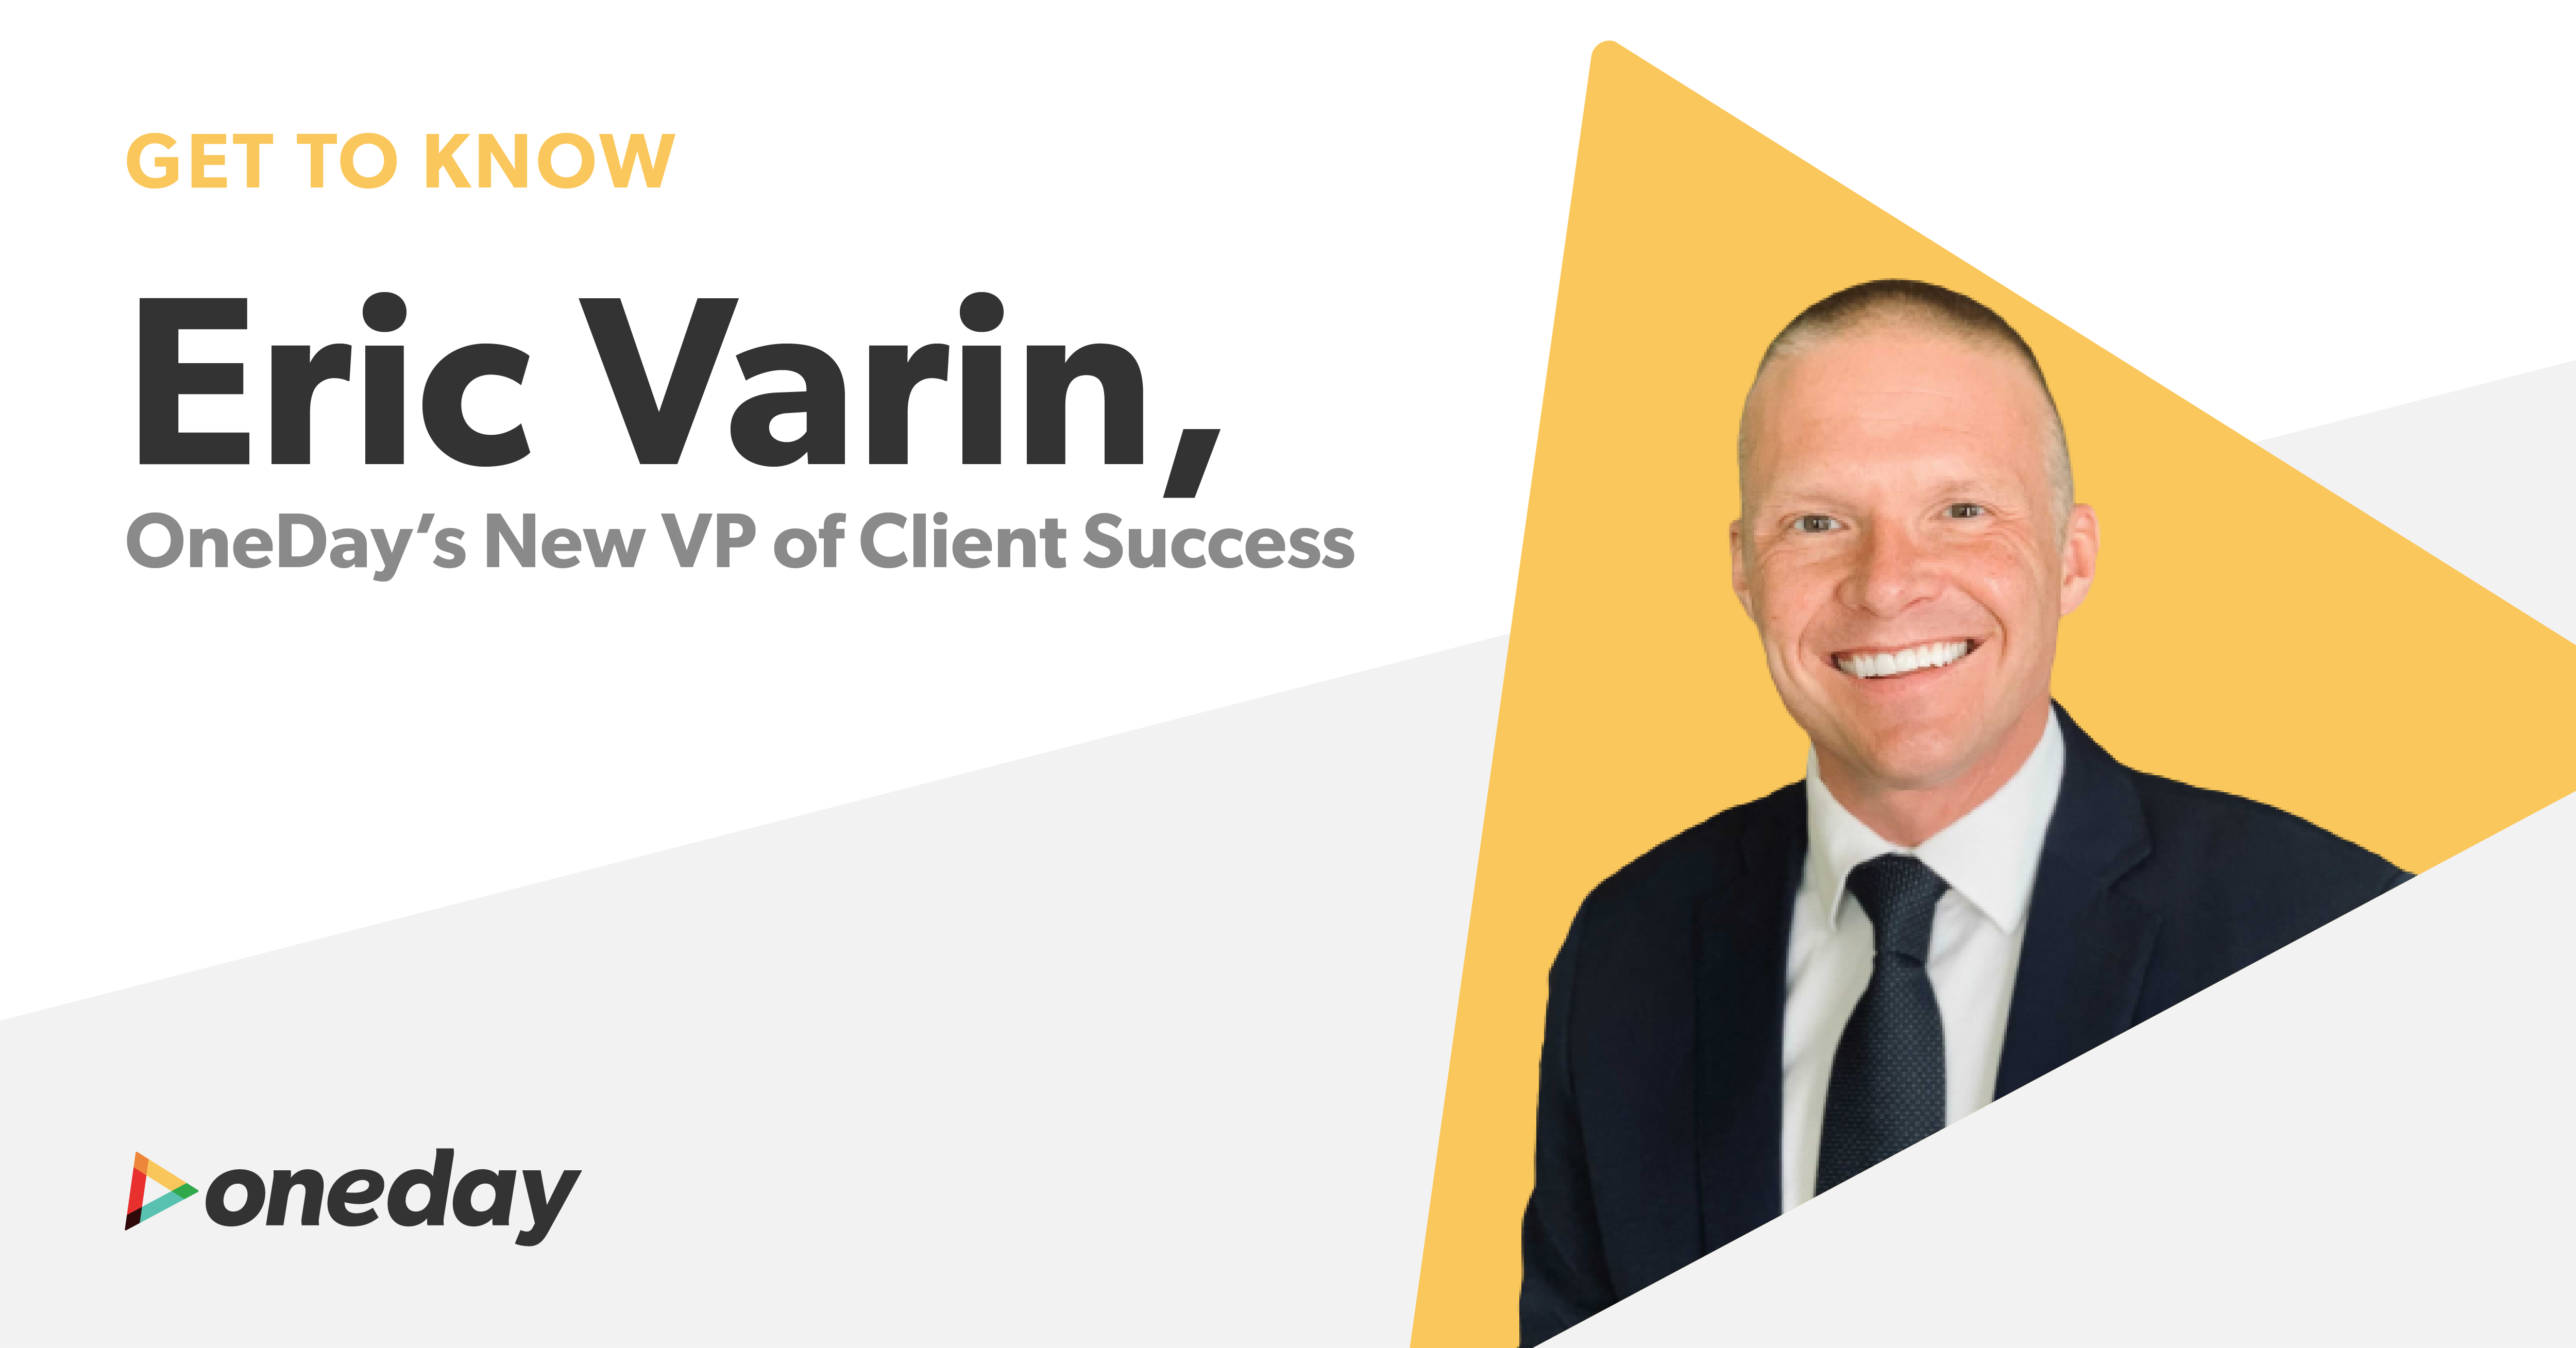 Eric Varin, OneDay’s new VP of Client Success, brings a wealth of knowledge and experience to his role at OneDay, helping drive us to our goals.